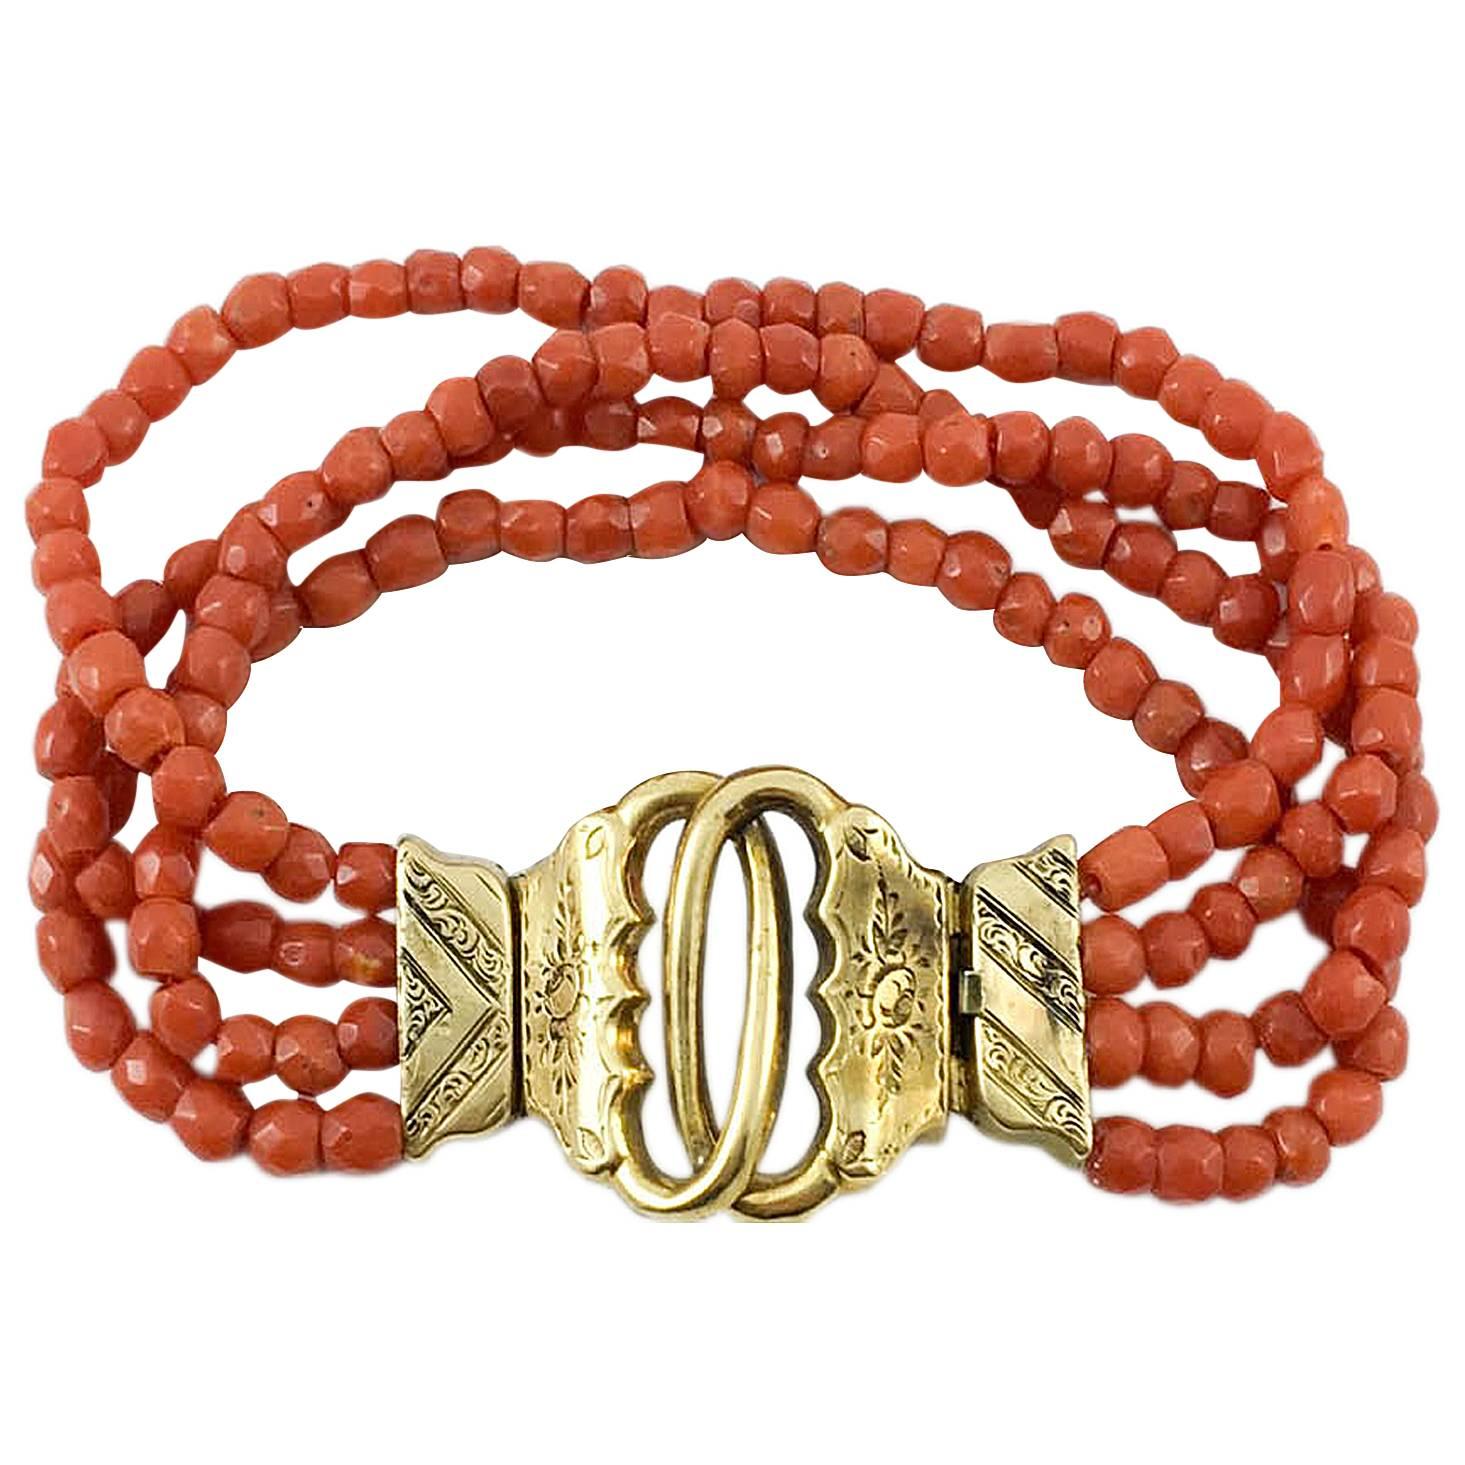 Antique Multi-Strand Coral and Gold Bracelet - Mid 19th Century